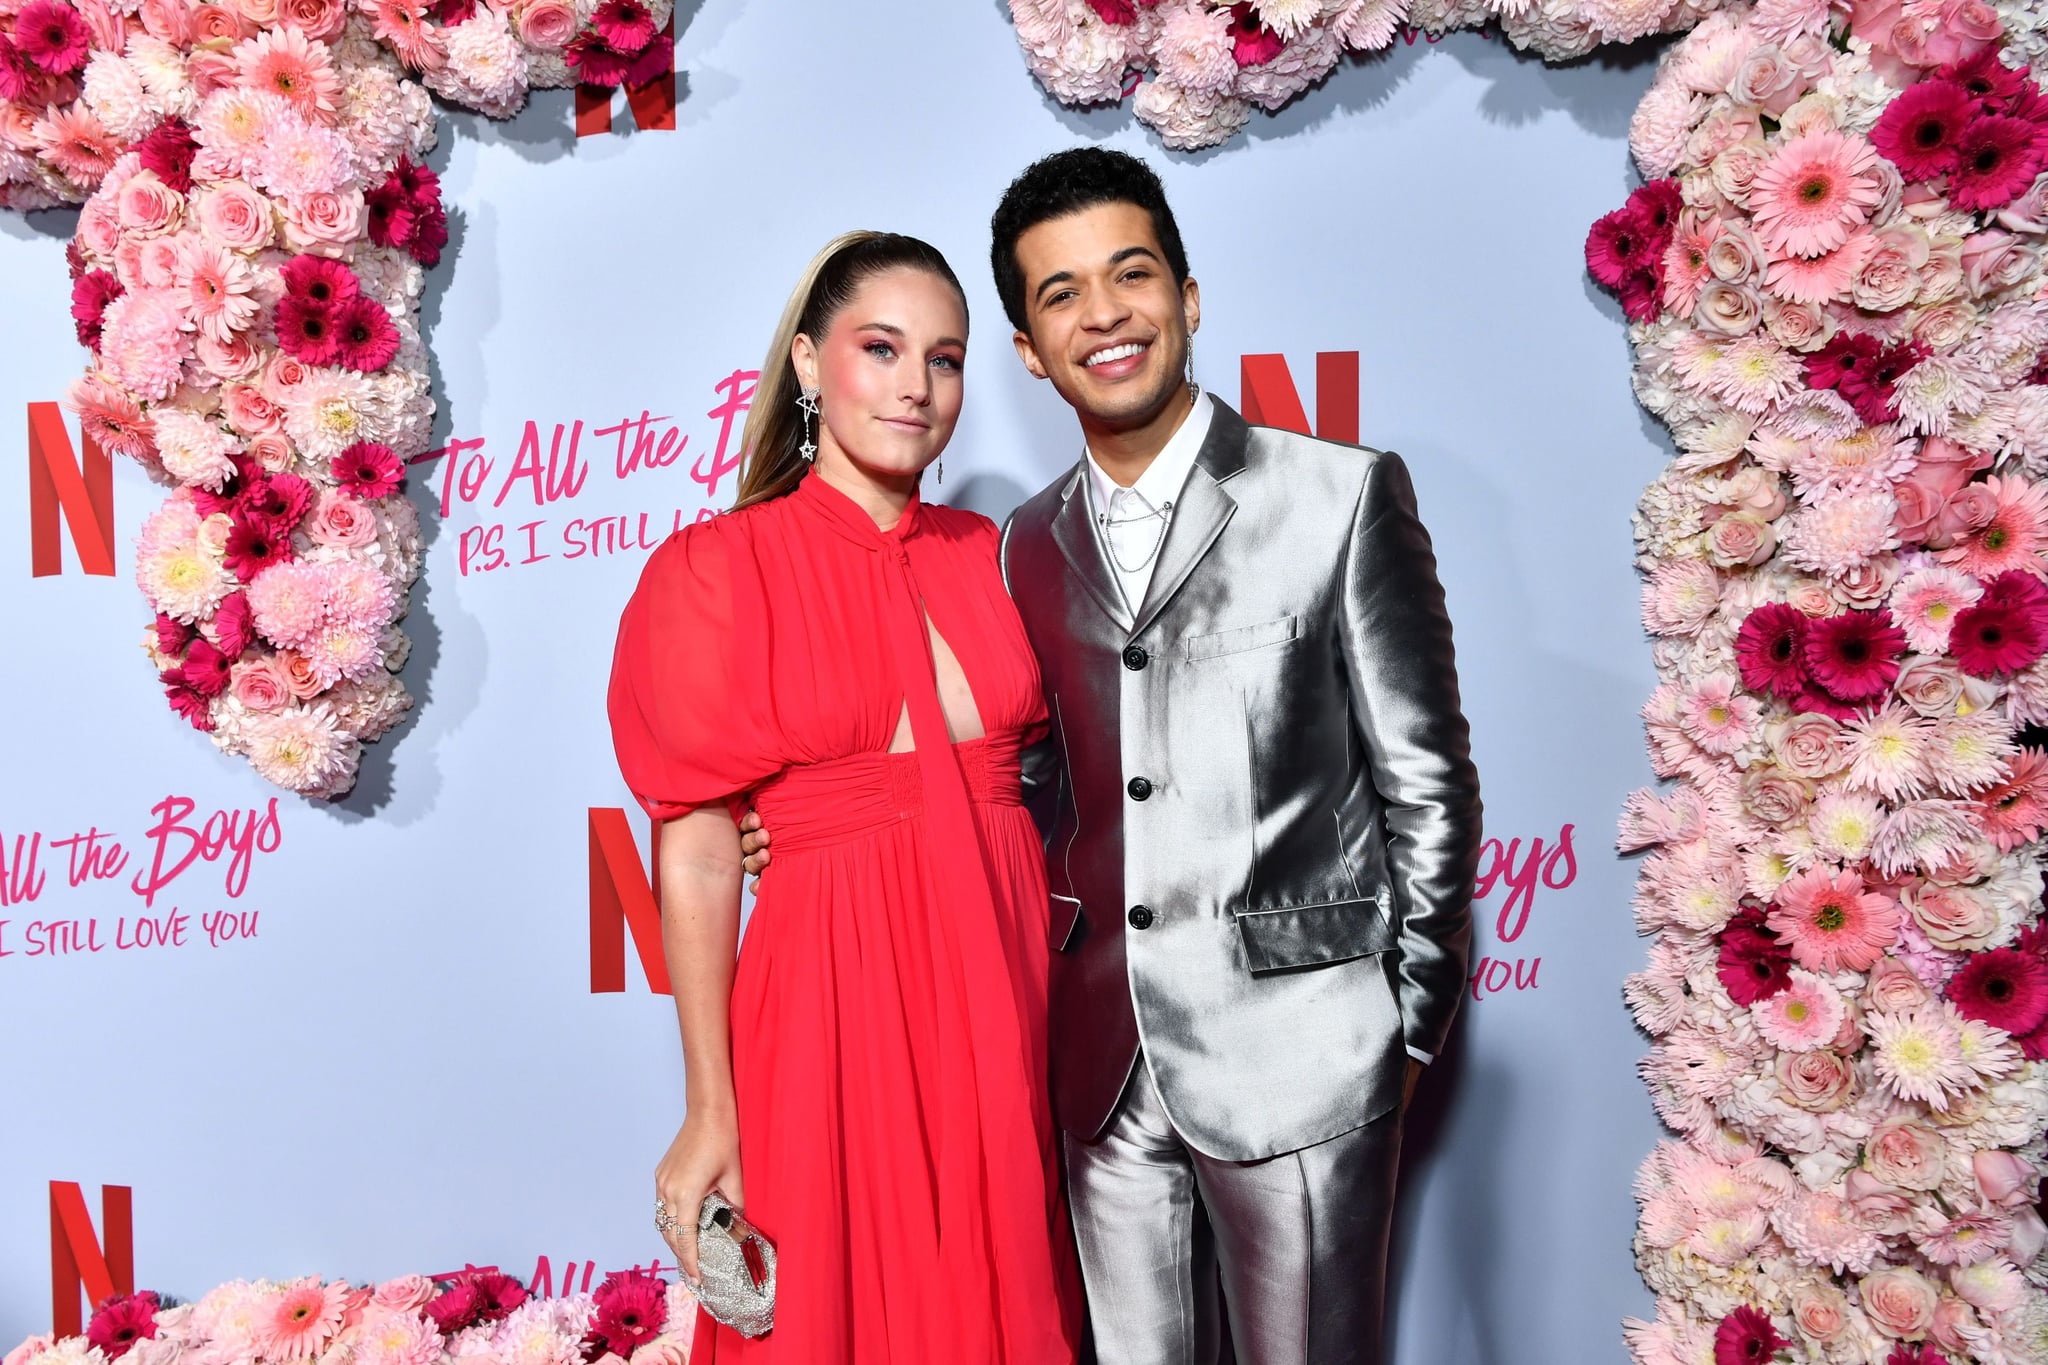 LOS ANGELES, CALIFORNIA - FEBRUARY 03: Ellie Woods and Jordan Fisher attends the premiere of Netflix's 'To All the Boys: P.S. I Love You' at The Egyptian Theatre on February 03, 2020 in Los Angeles, California. (Photo by Emma McIntyre/Getty Imagesfor Netflix)